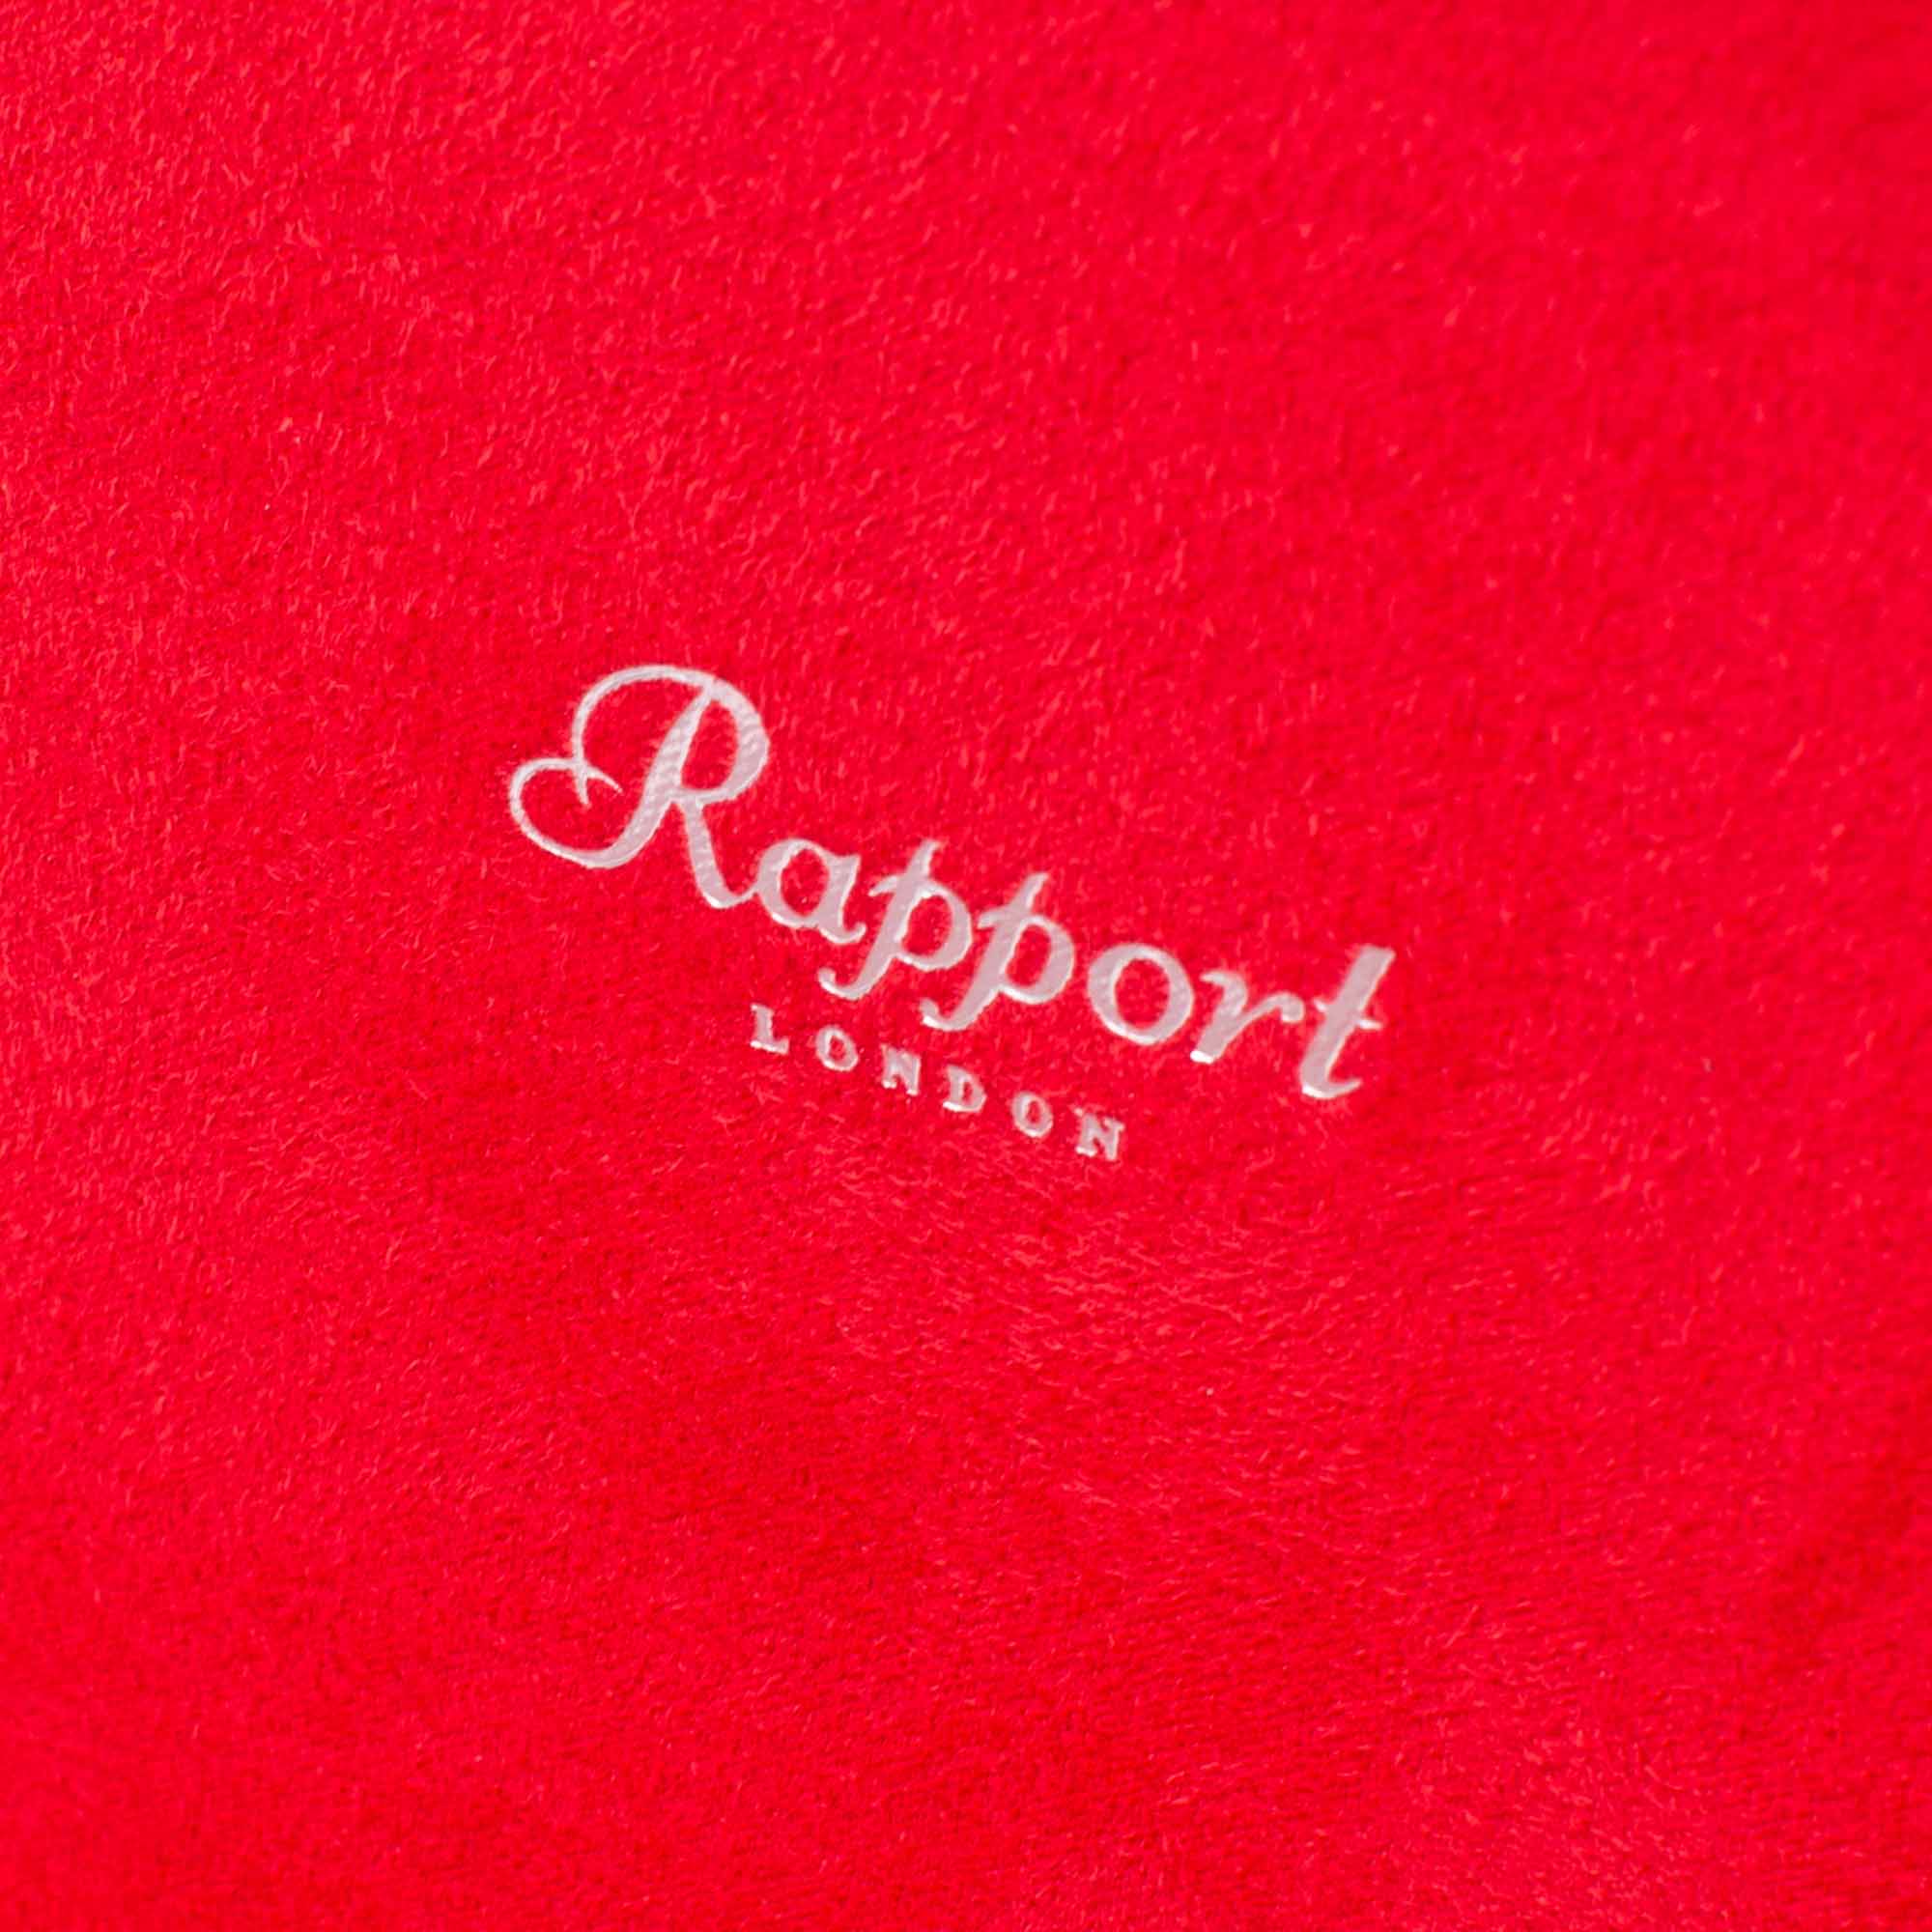 Rapport-Watch Box-Heritage Eight Watch Box-Red